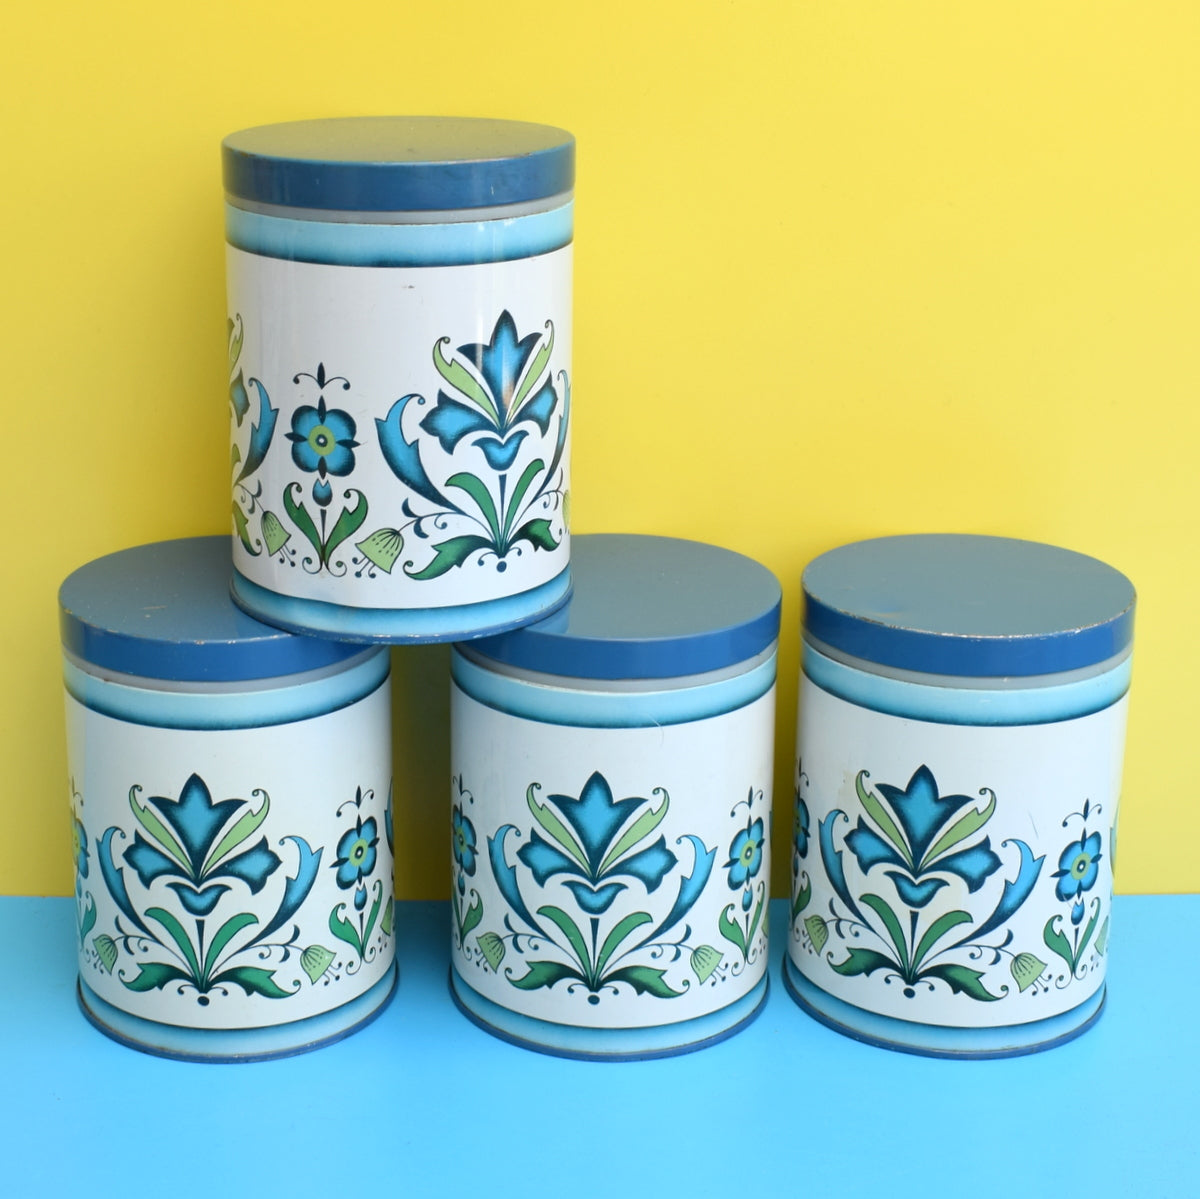 Vintage 1970s Flower Power Tin Canisters - Blue